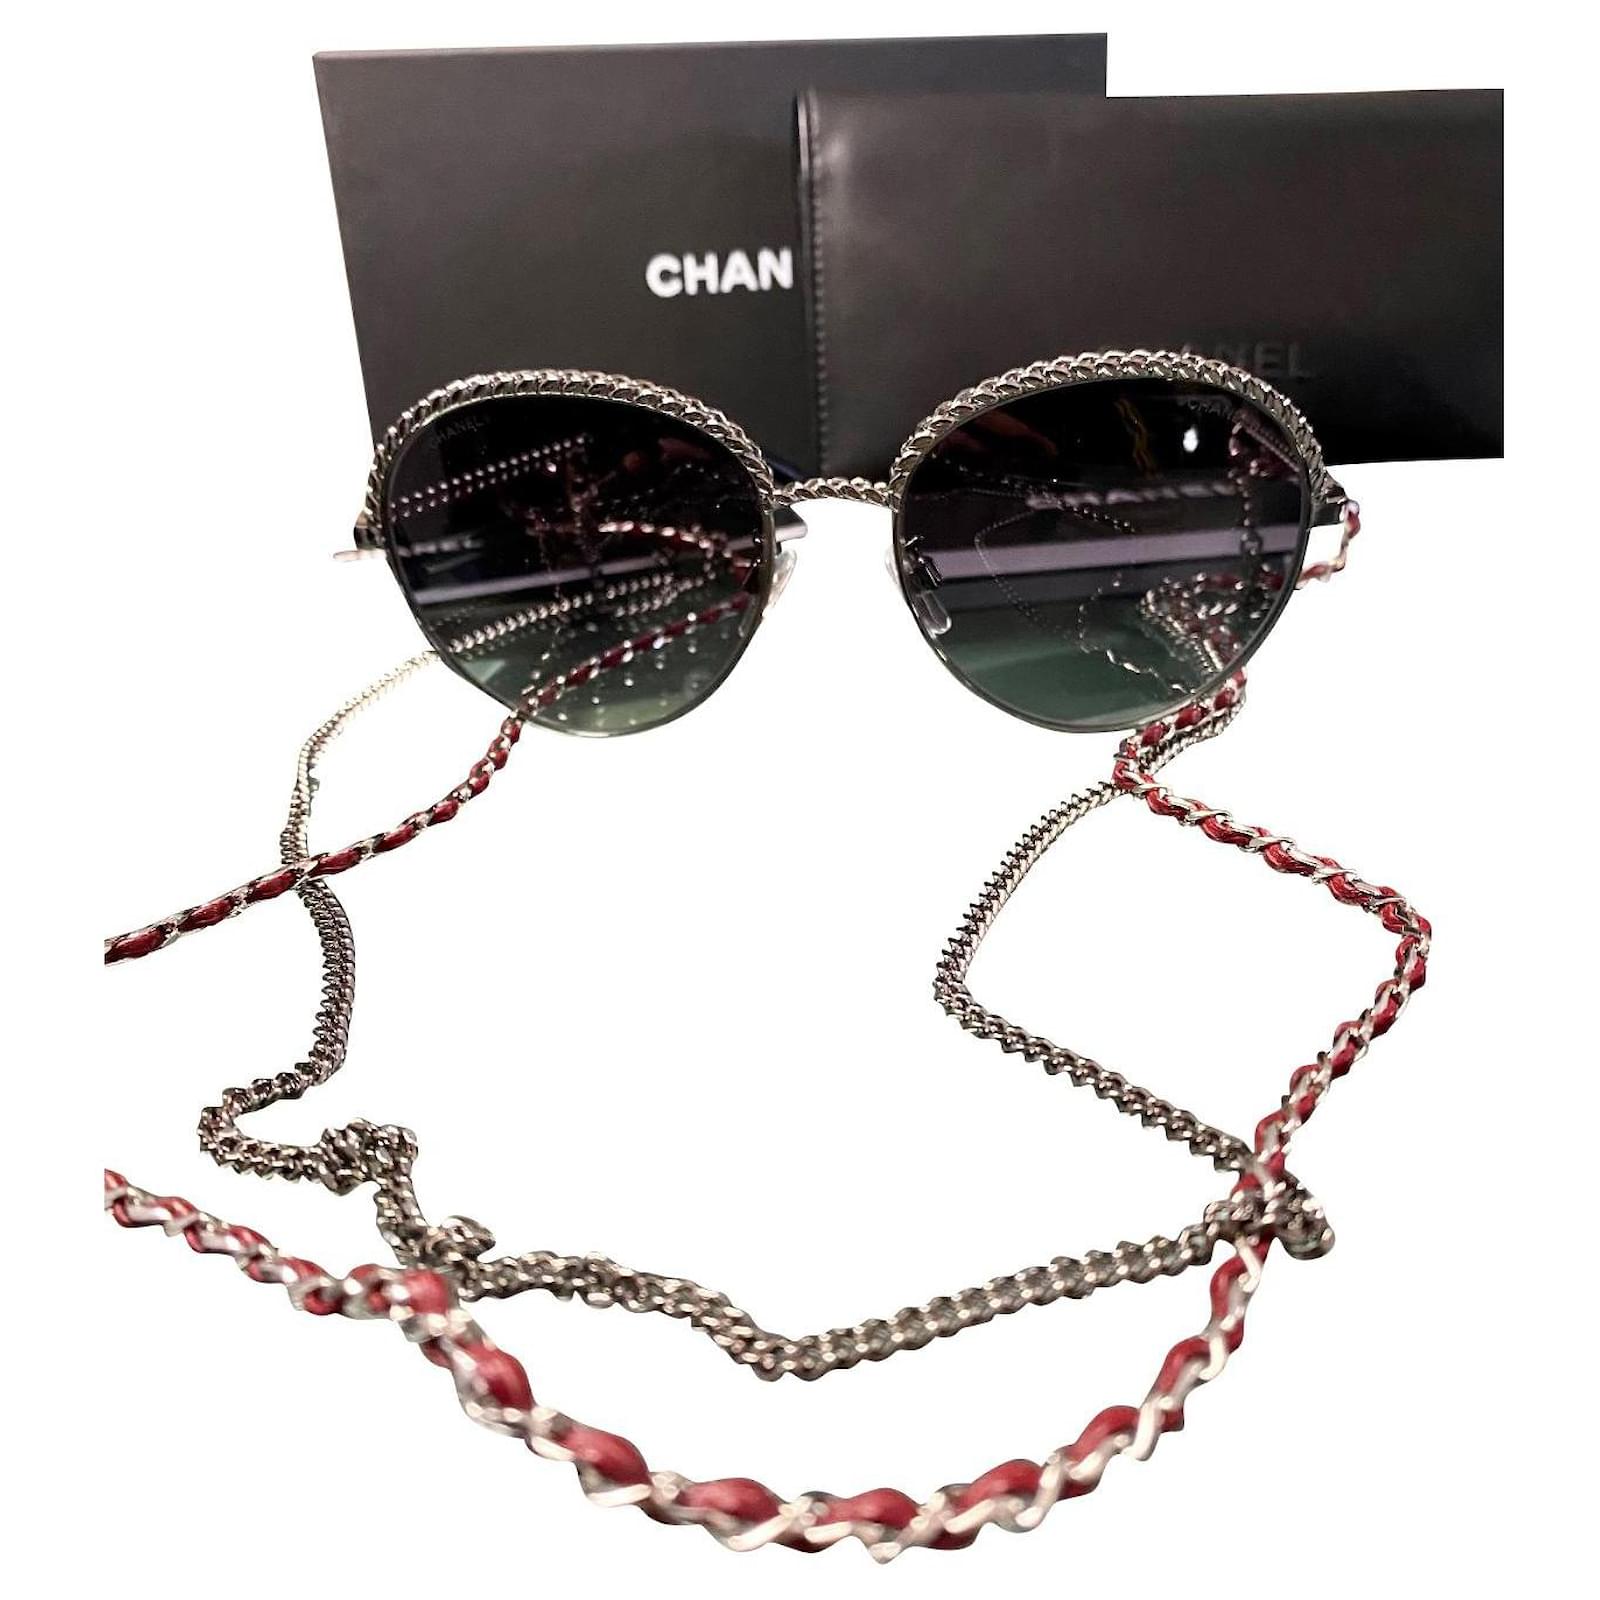 Chanel pantos double chain sunglasses Silvery Grey Dark red Metal